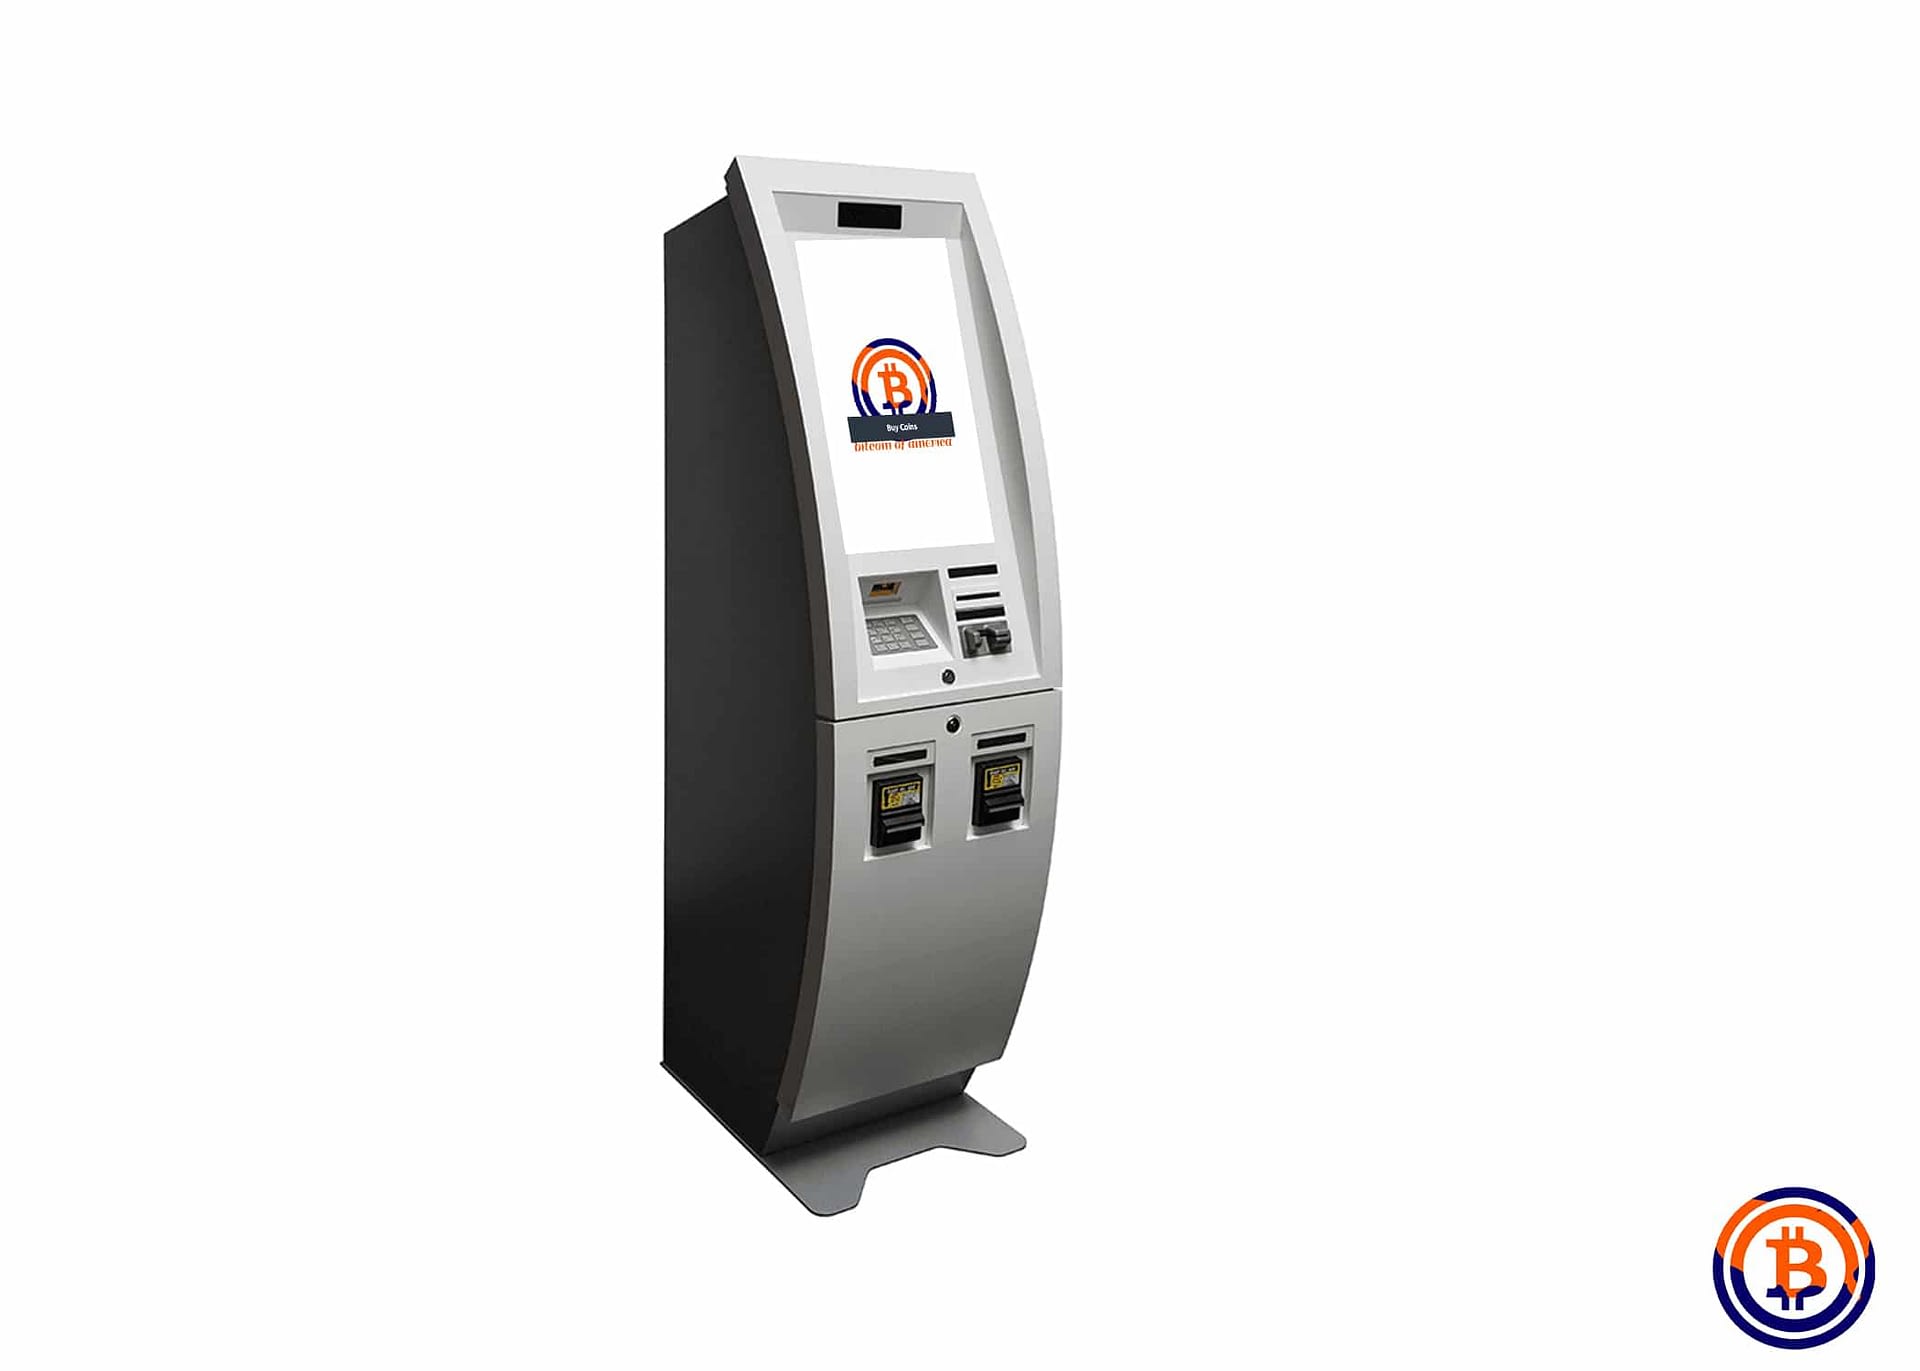 Rise of Bitcoin ATMs